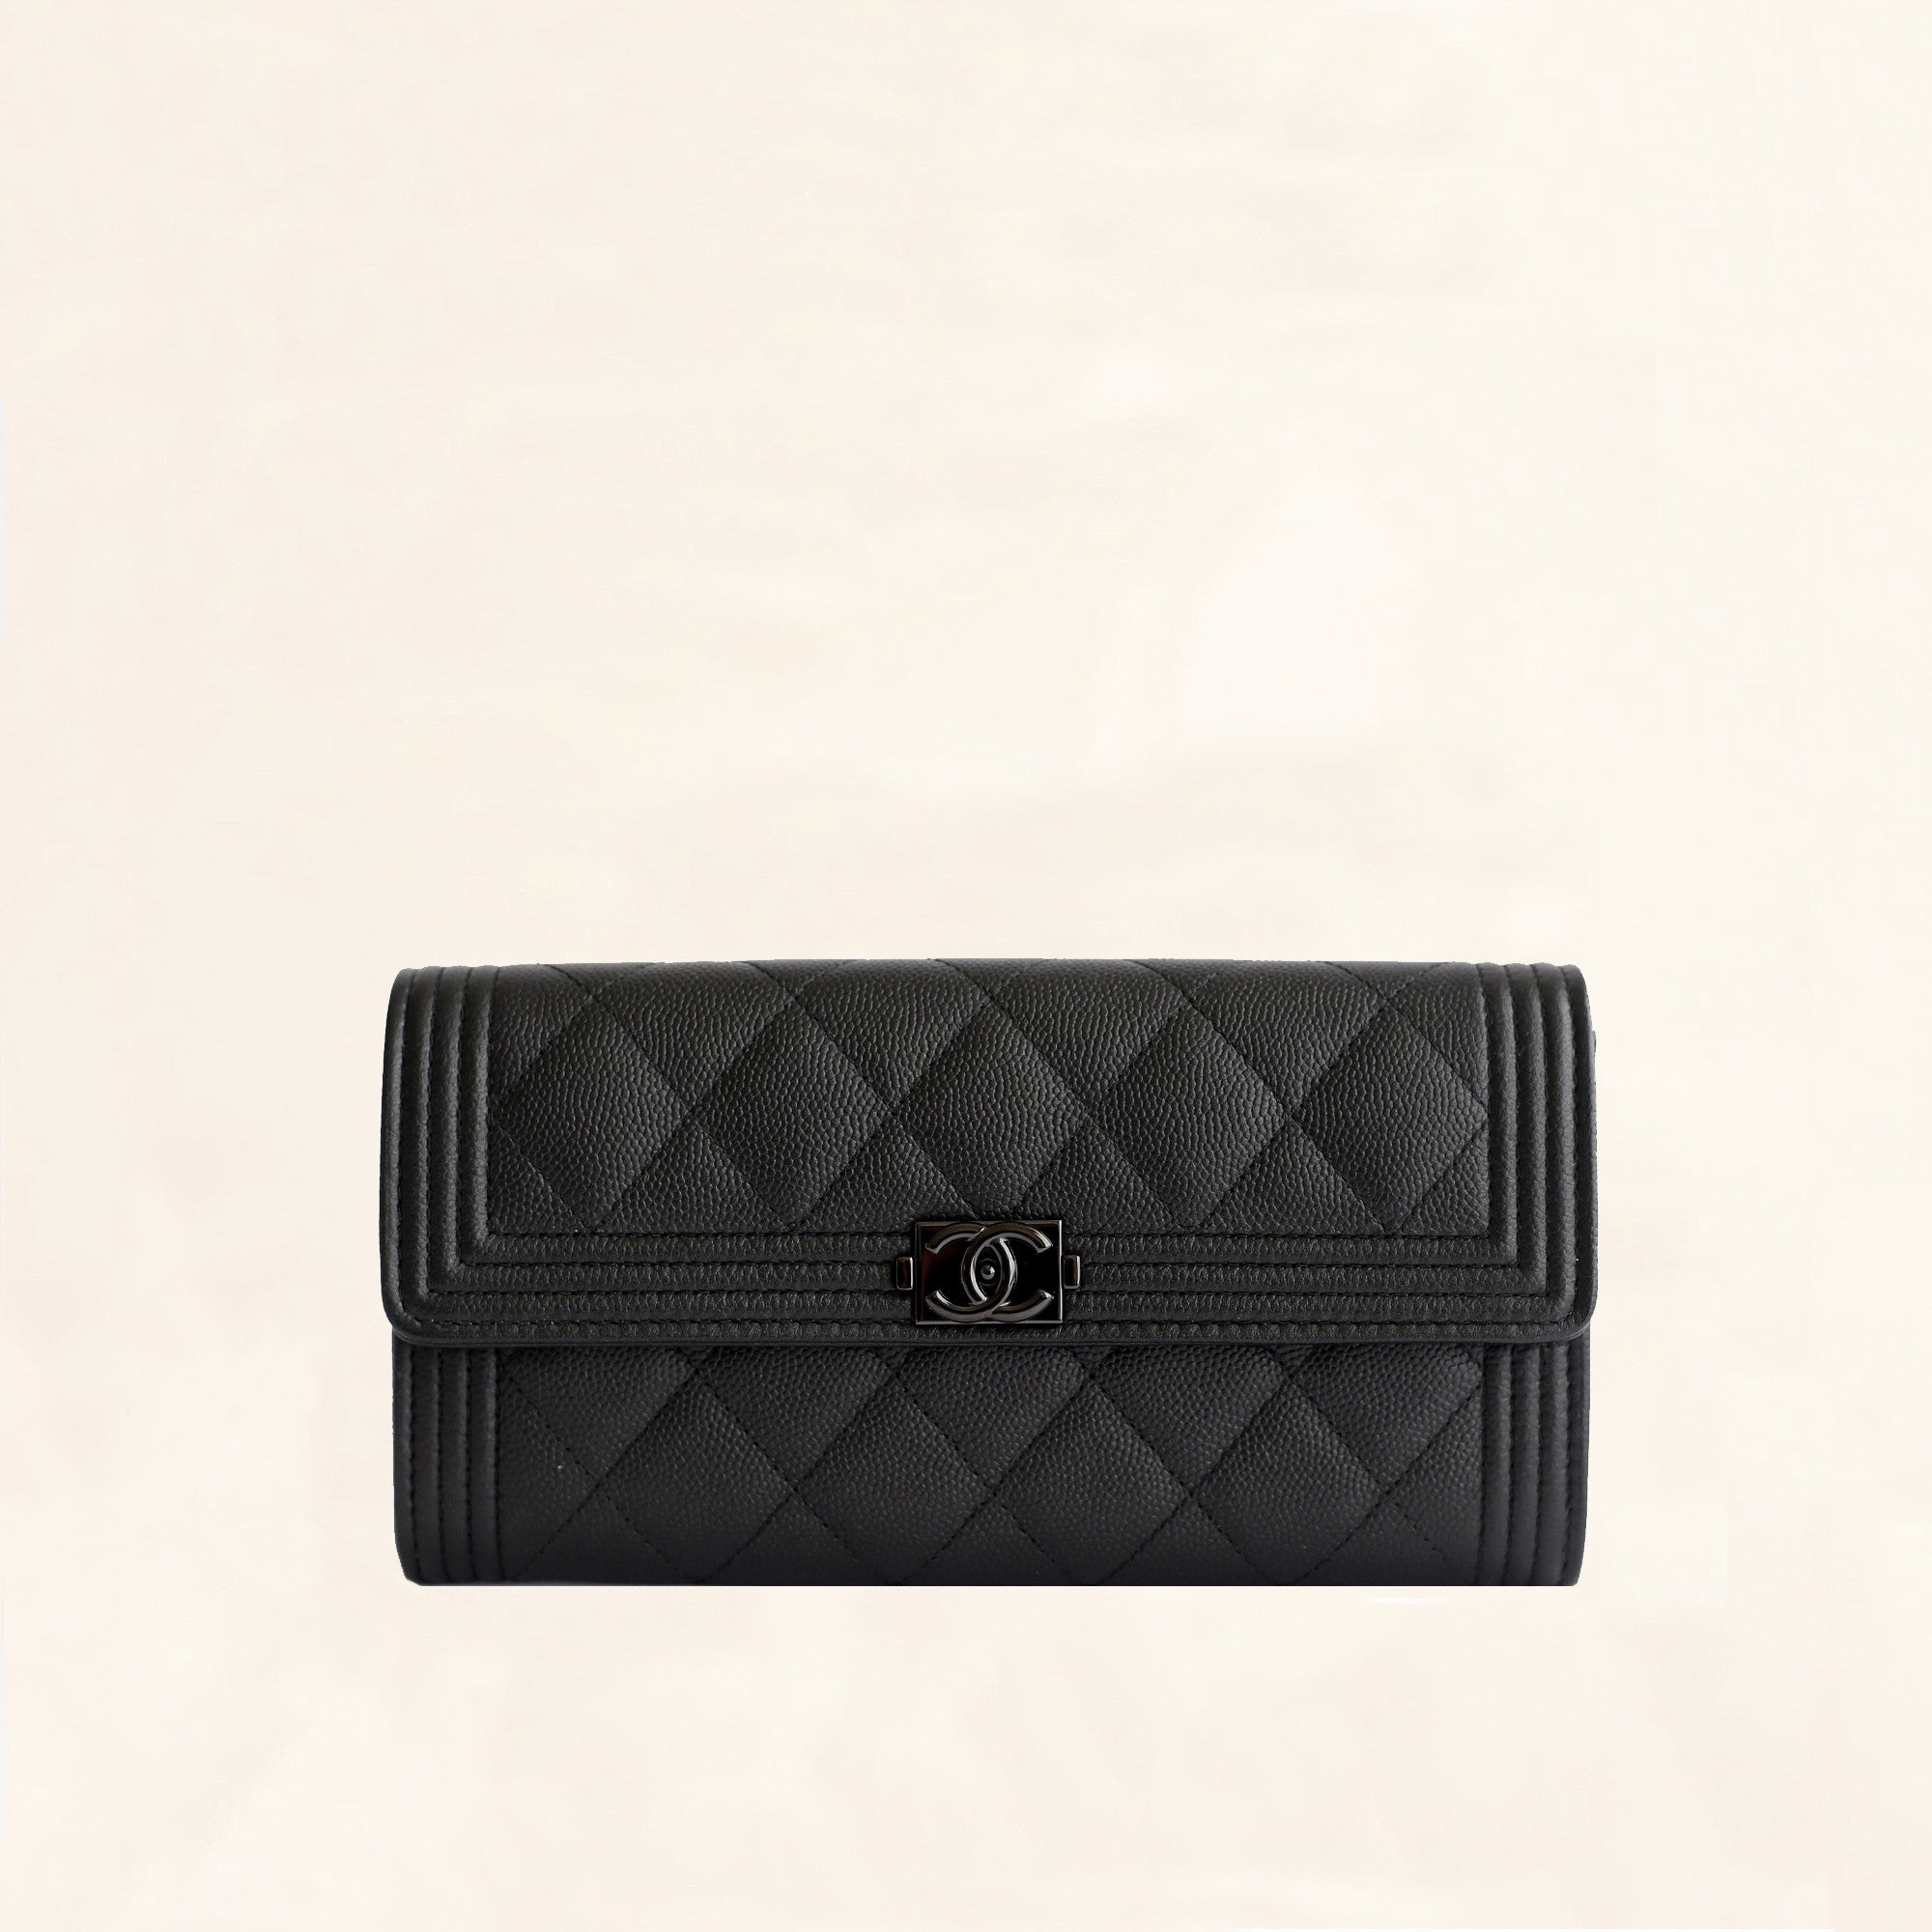 CHANEL Lambskin Quilted Medium Double Flap So Black 63060  FASHIONPHILE